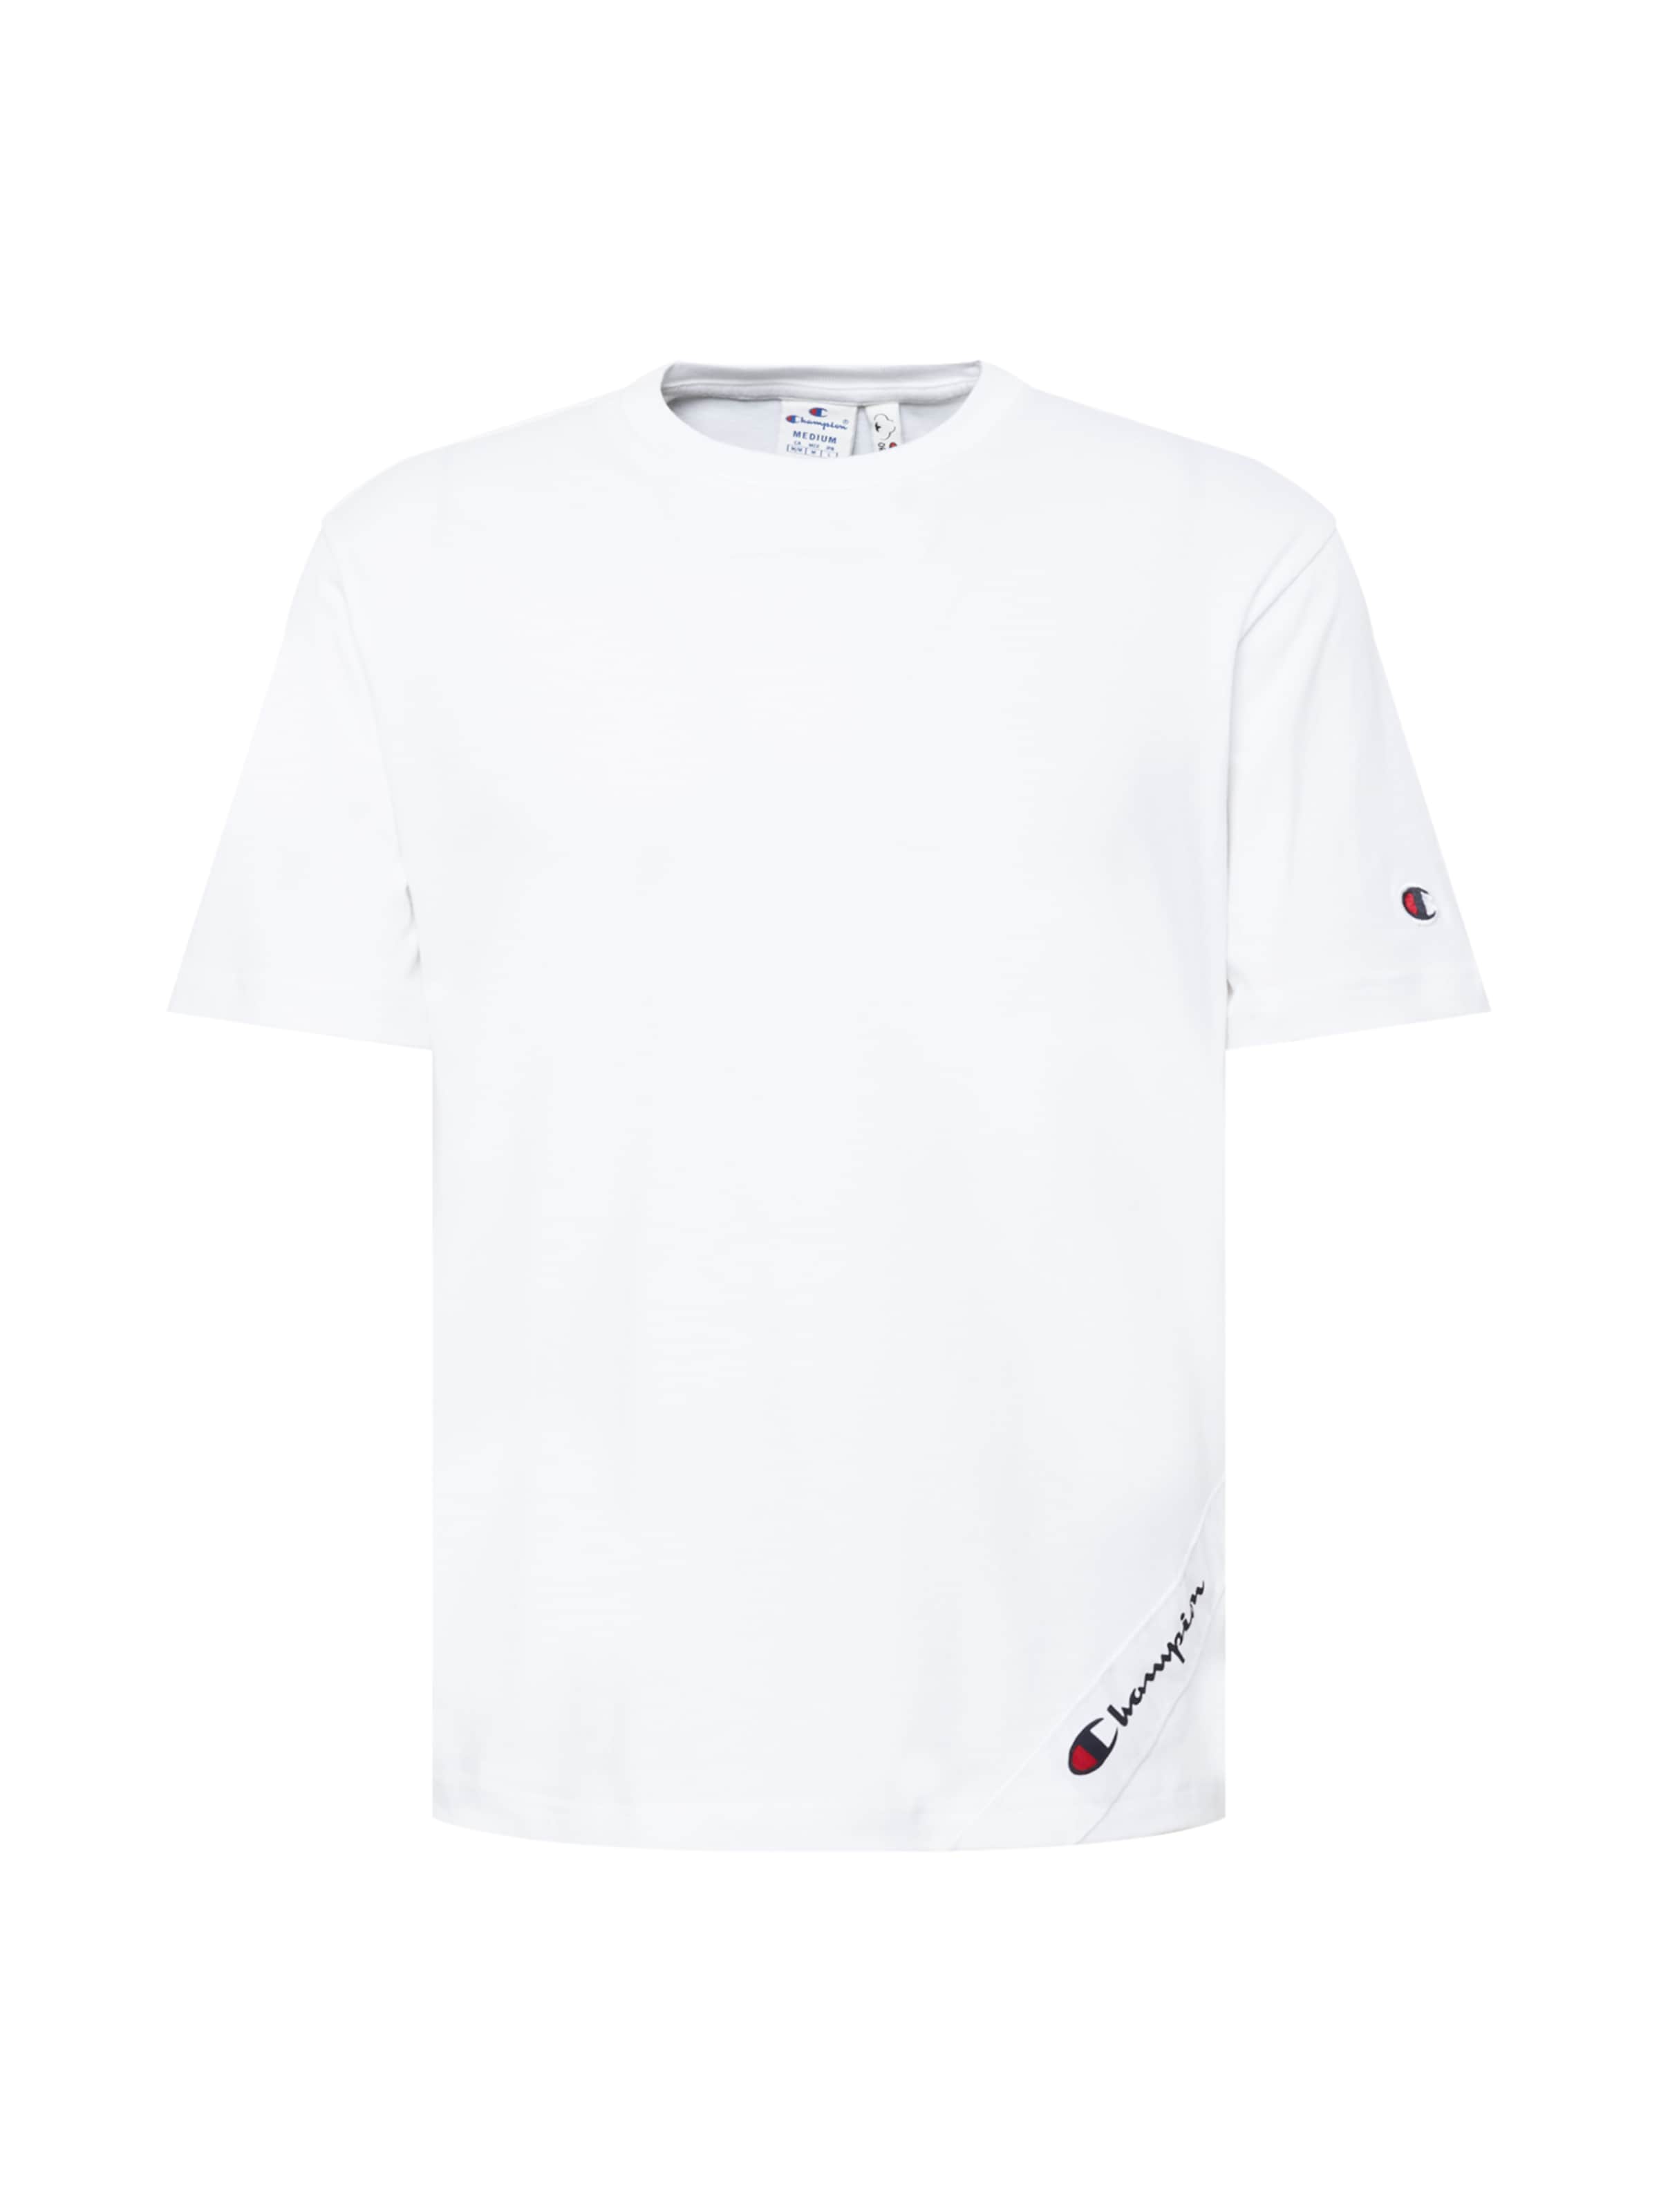 NHQYY Uomo Champion Authentic Athletic Apparel T-Shirt in Bianco 